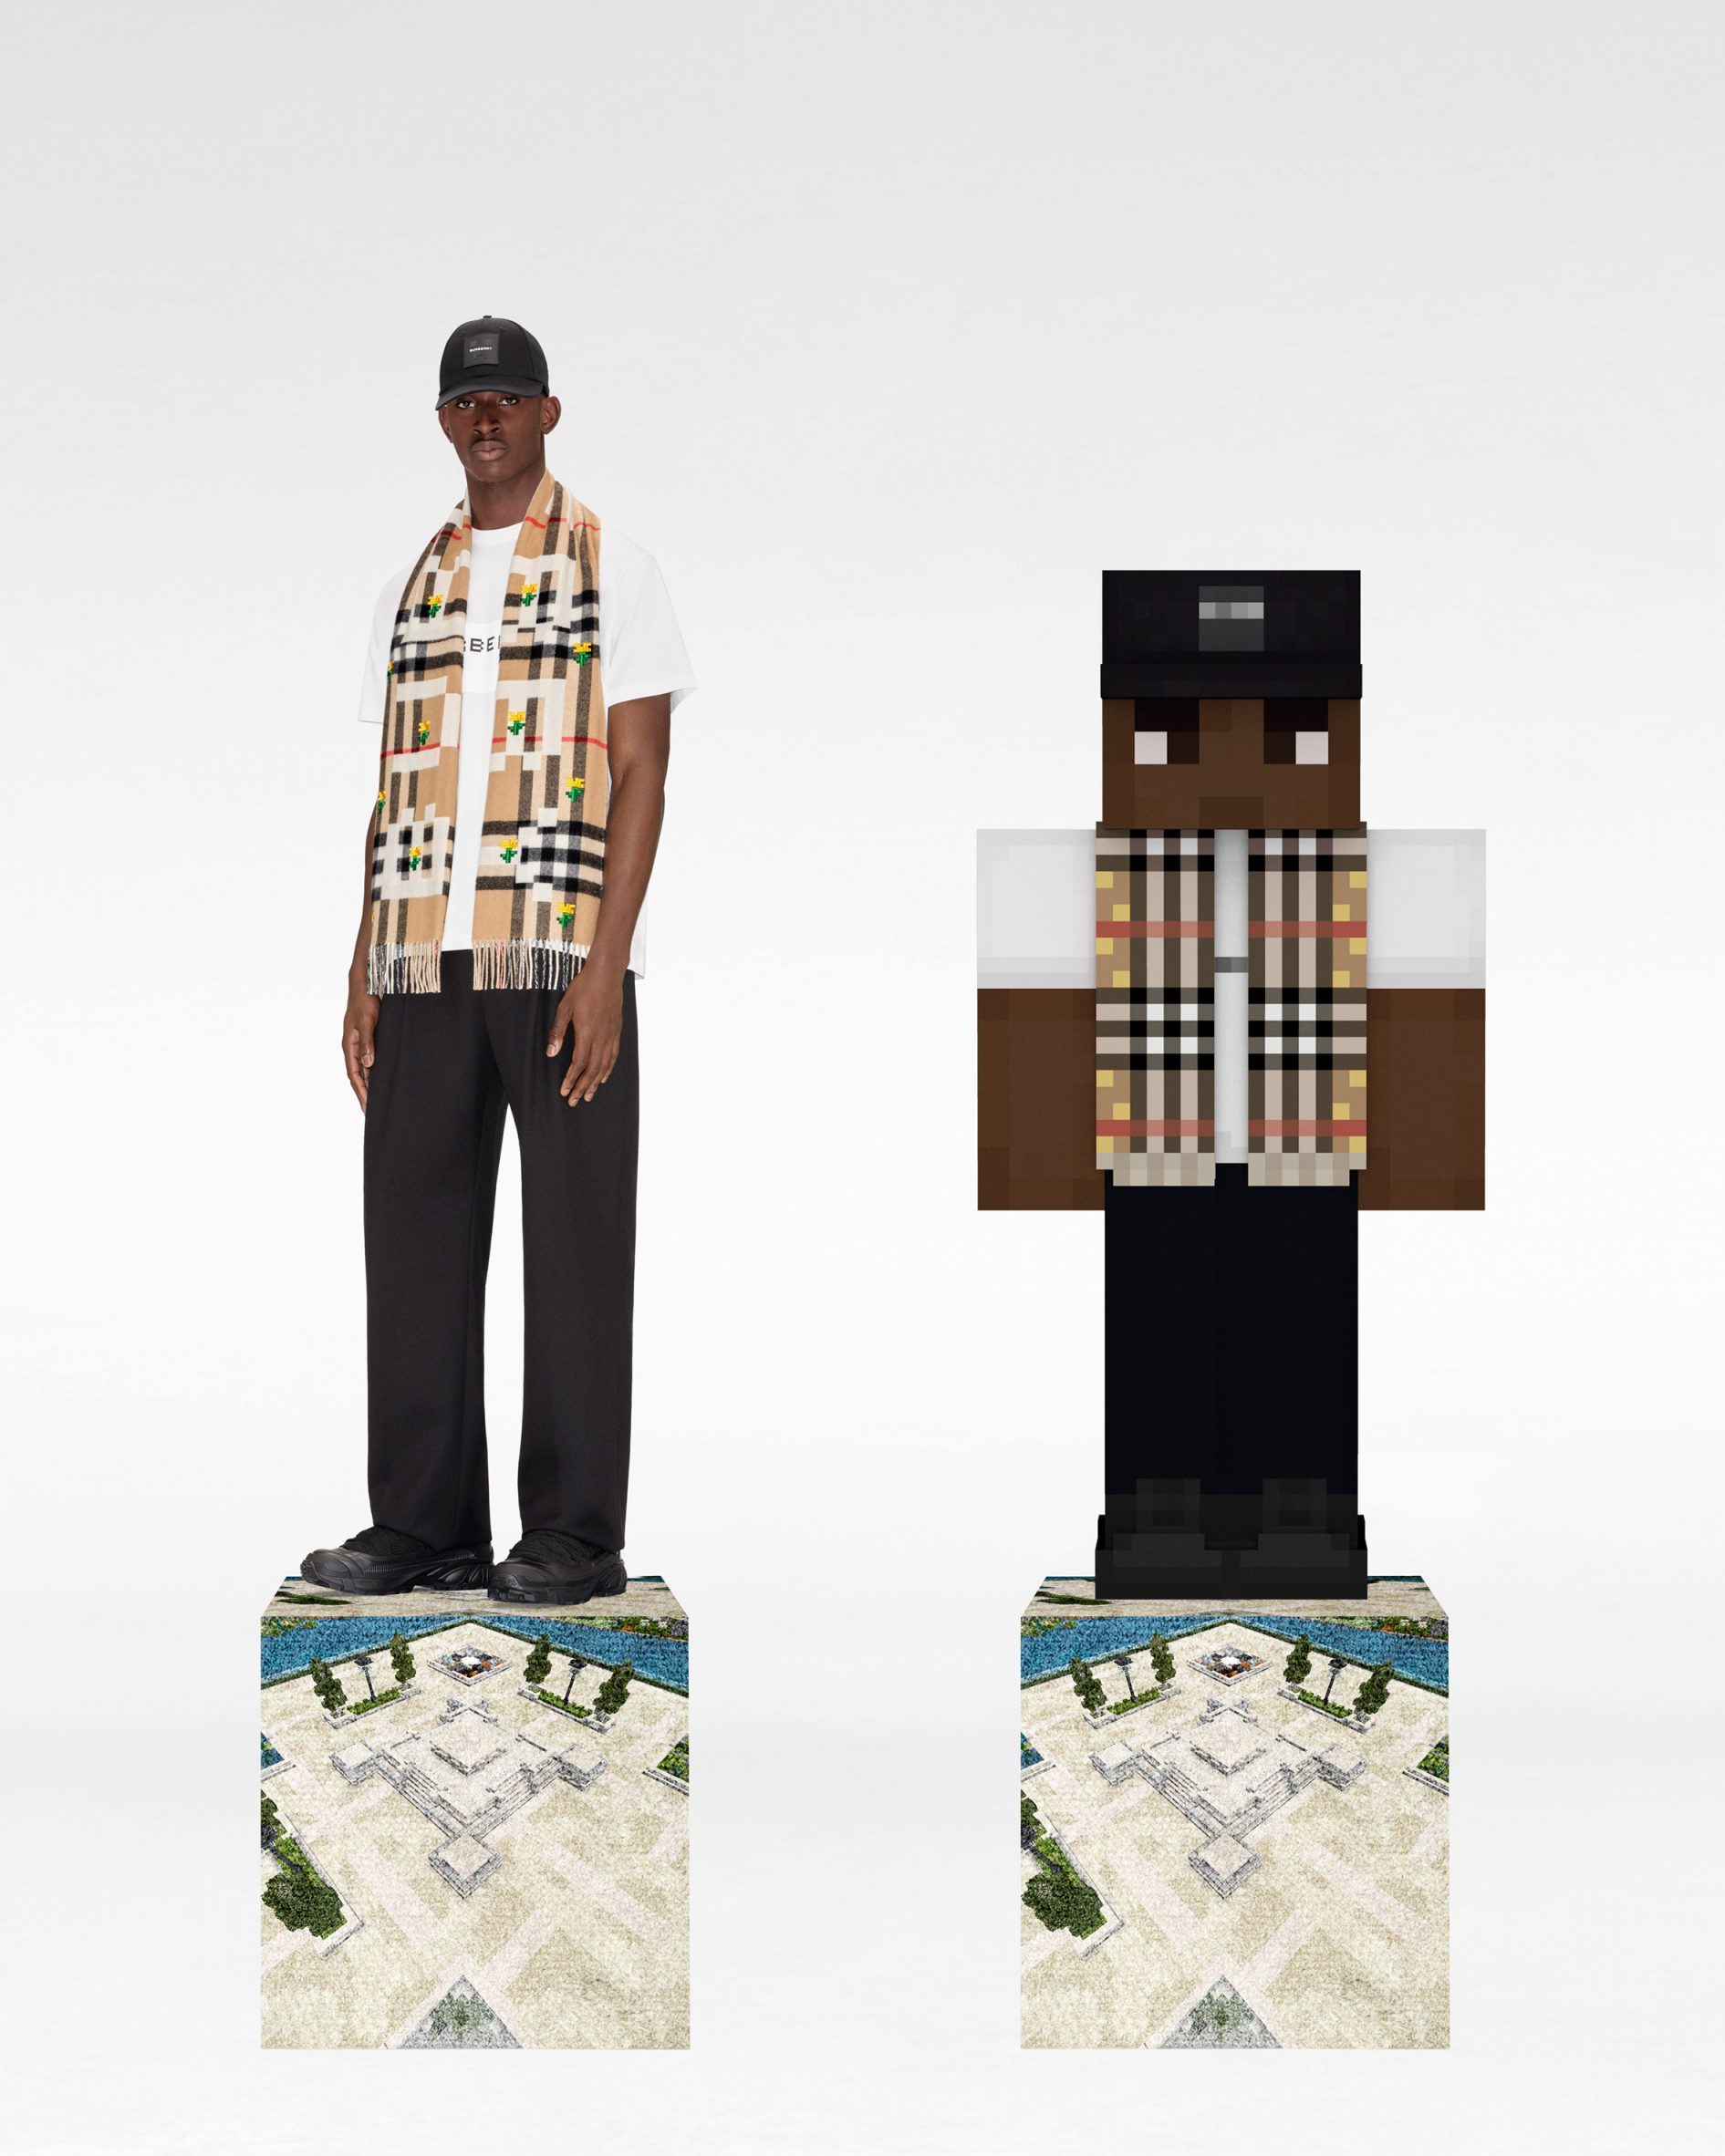 Make wallpaper with your minecraft avatar by Zakmcdesigner  Fiverr